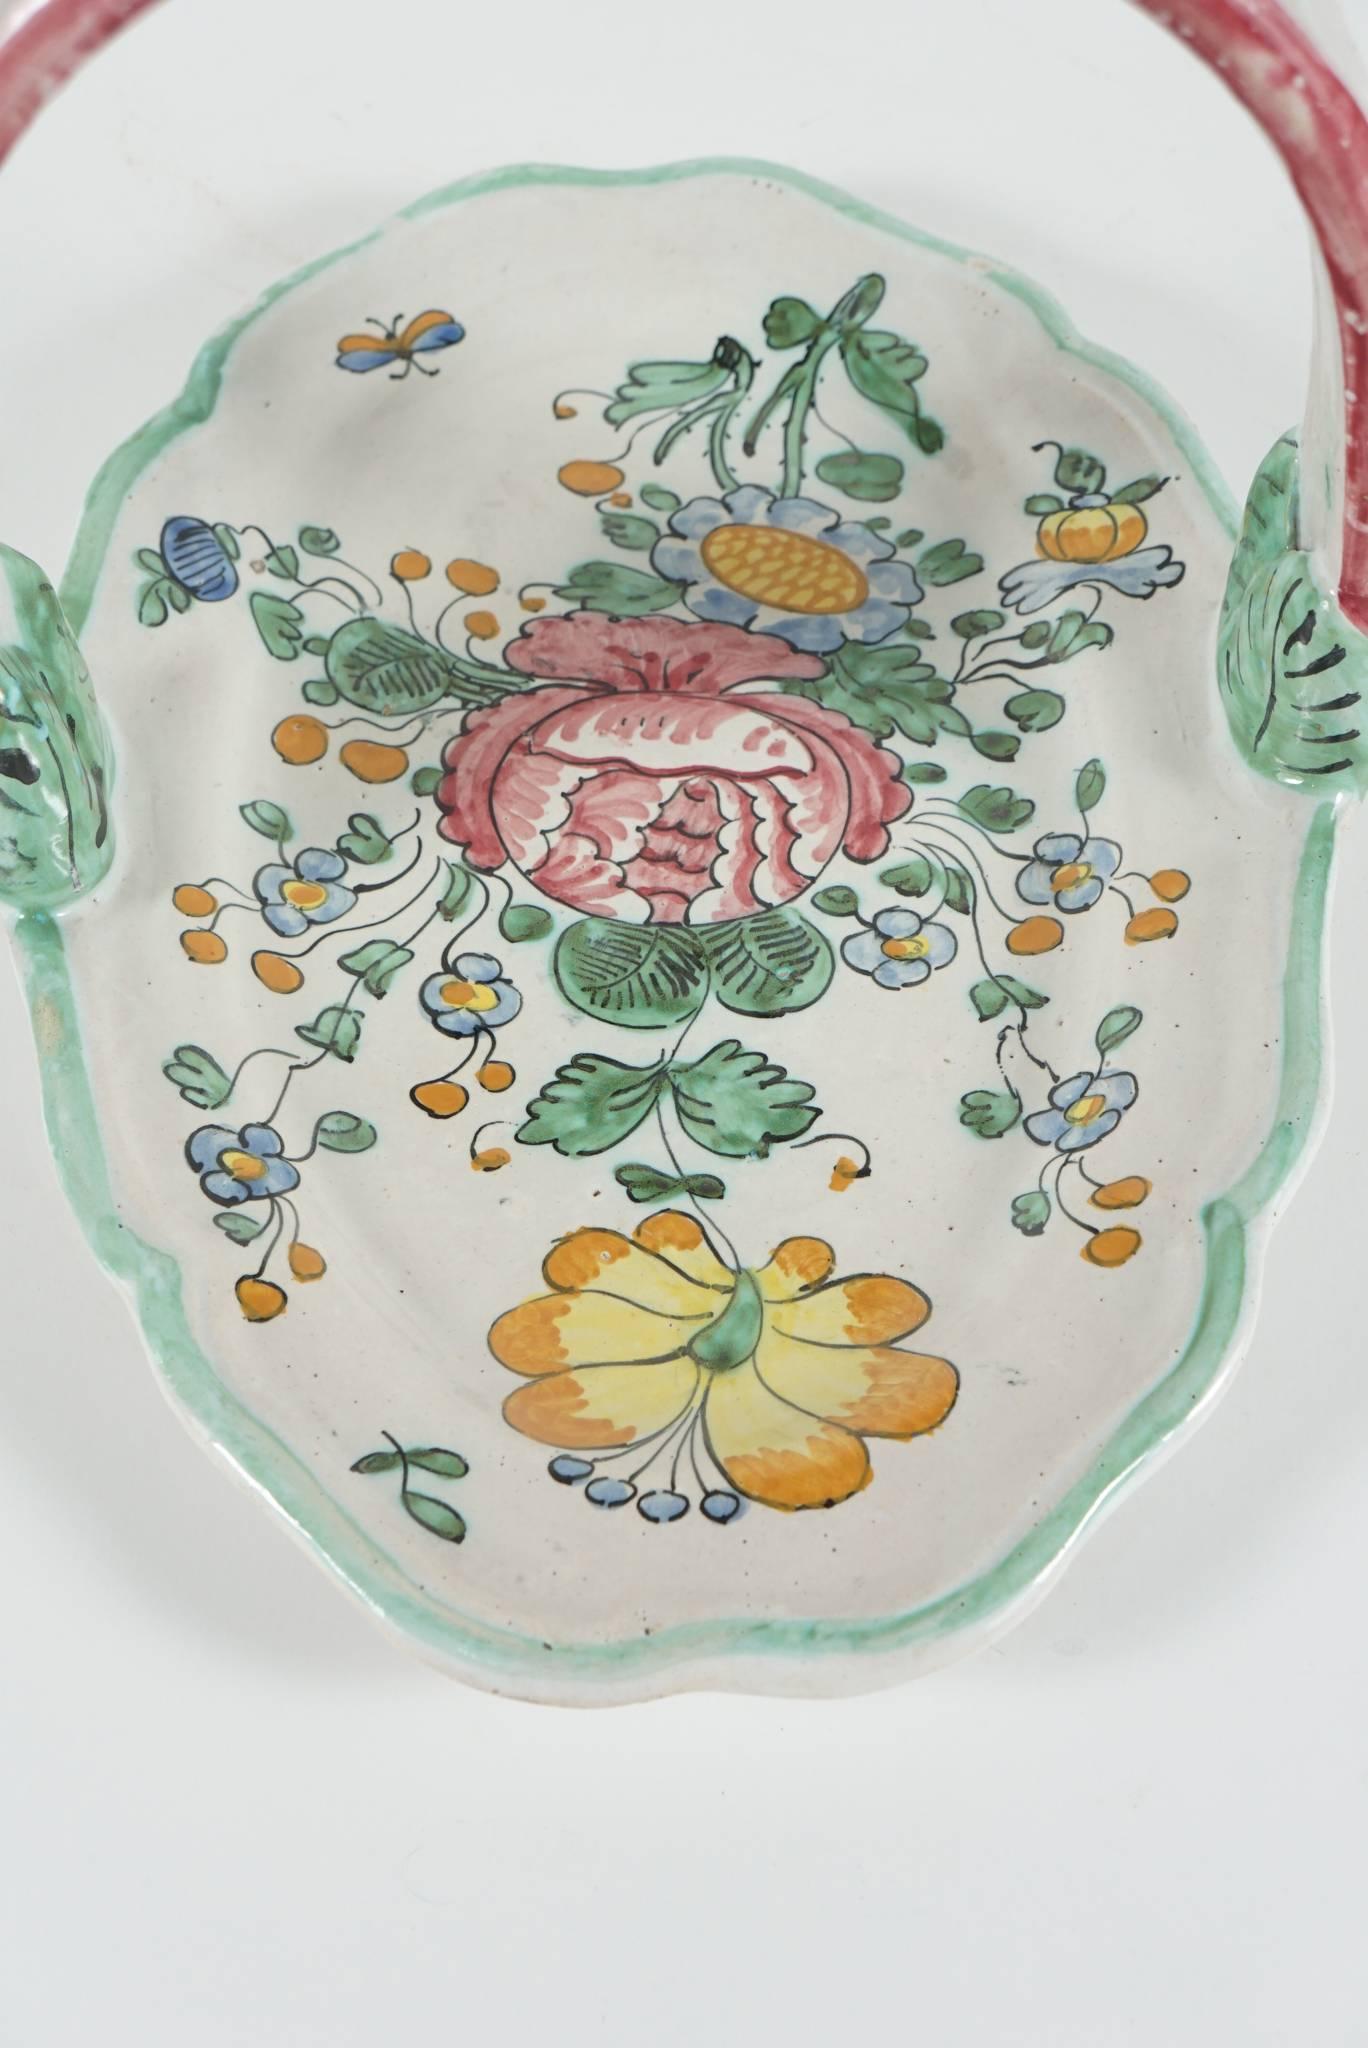 20th Century Italian Pottery Tray with Floral Decoration from the Estate of Bunny Mellon